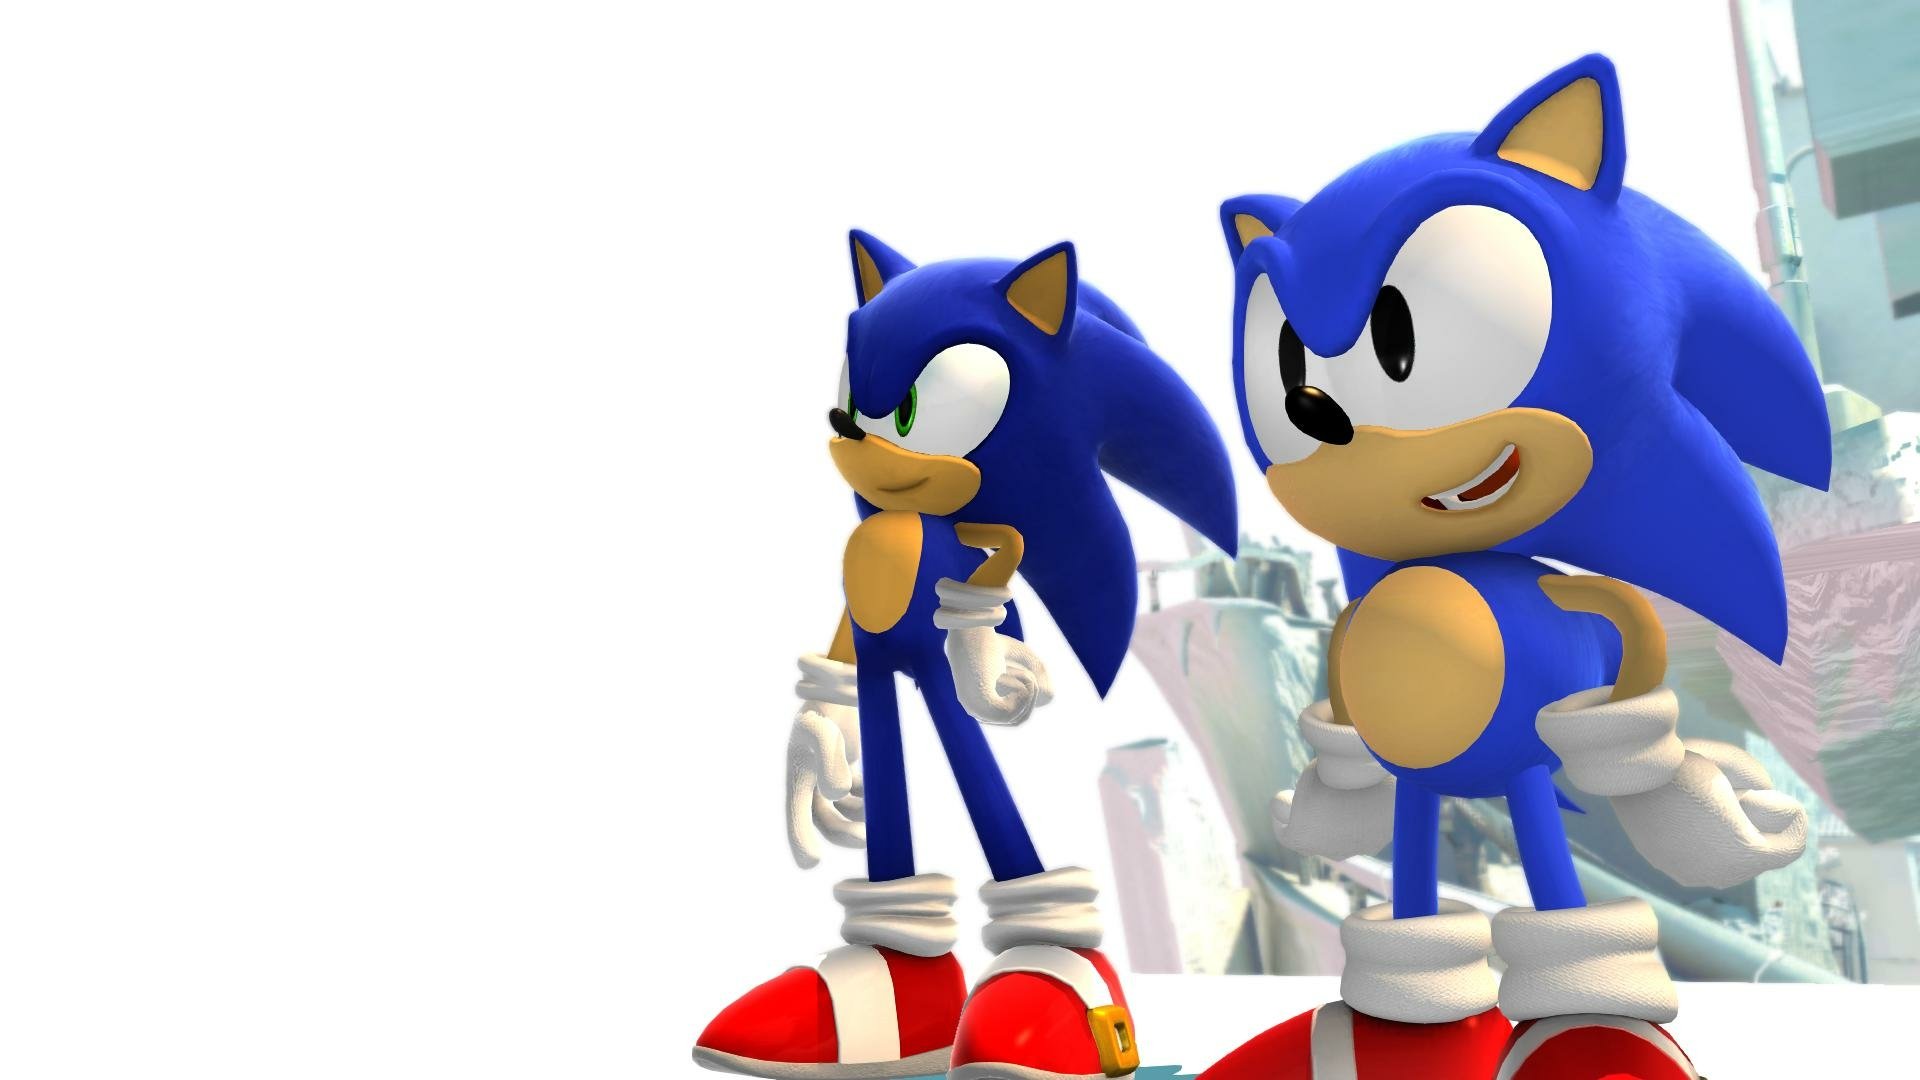 sonic generations models in unity